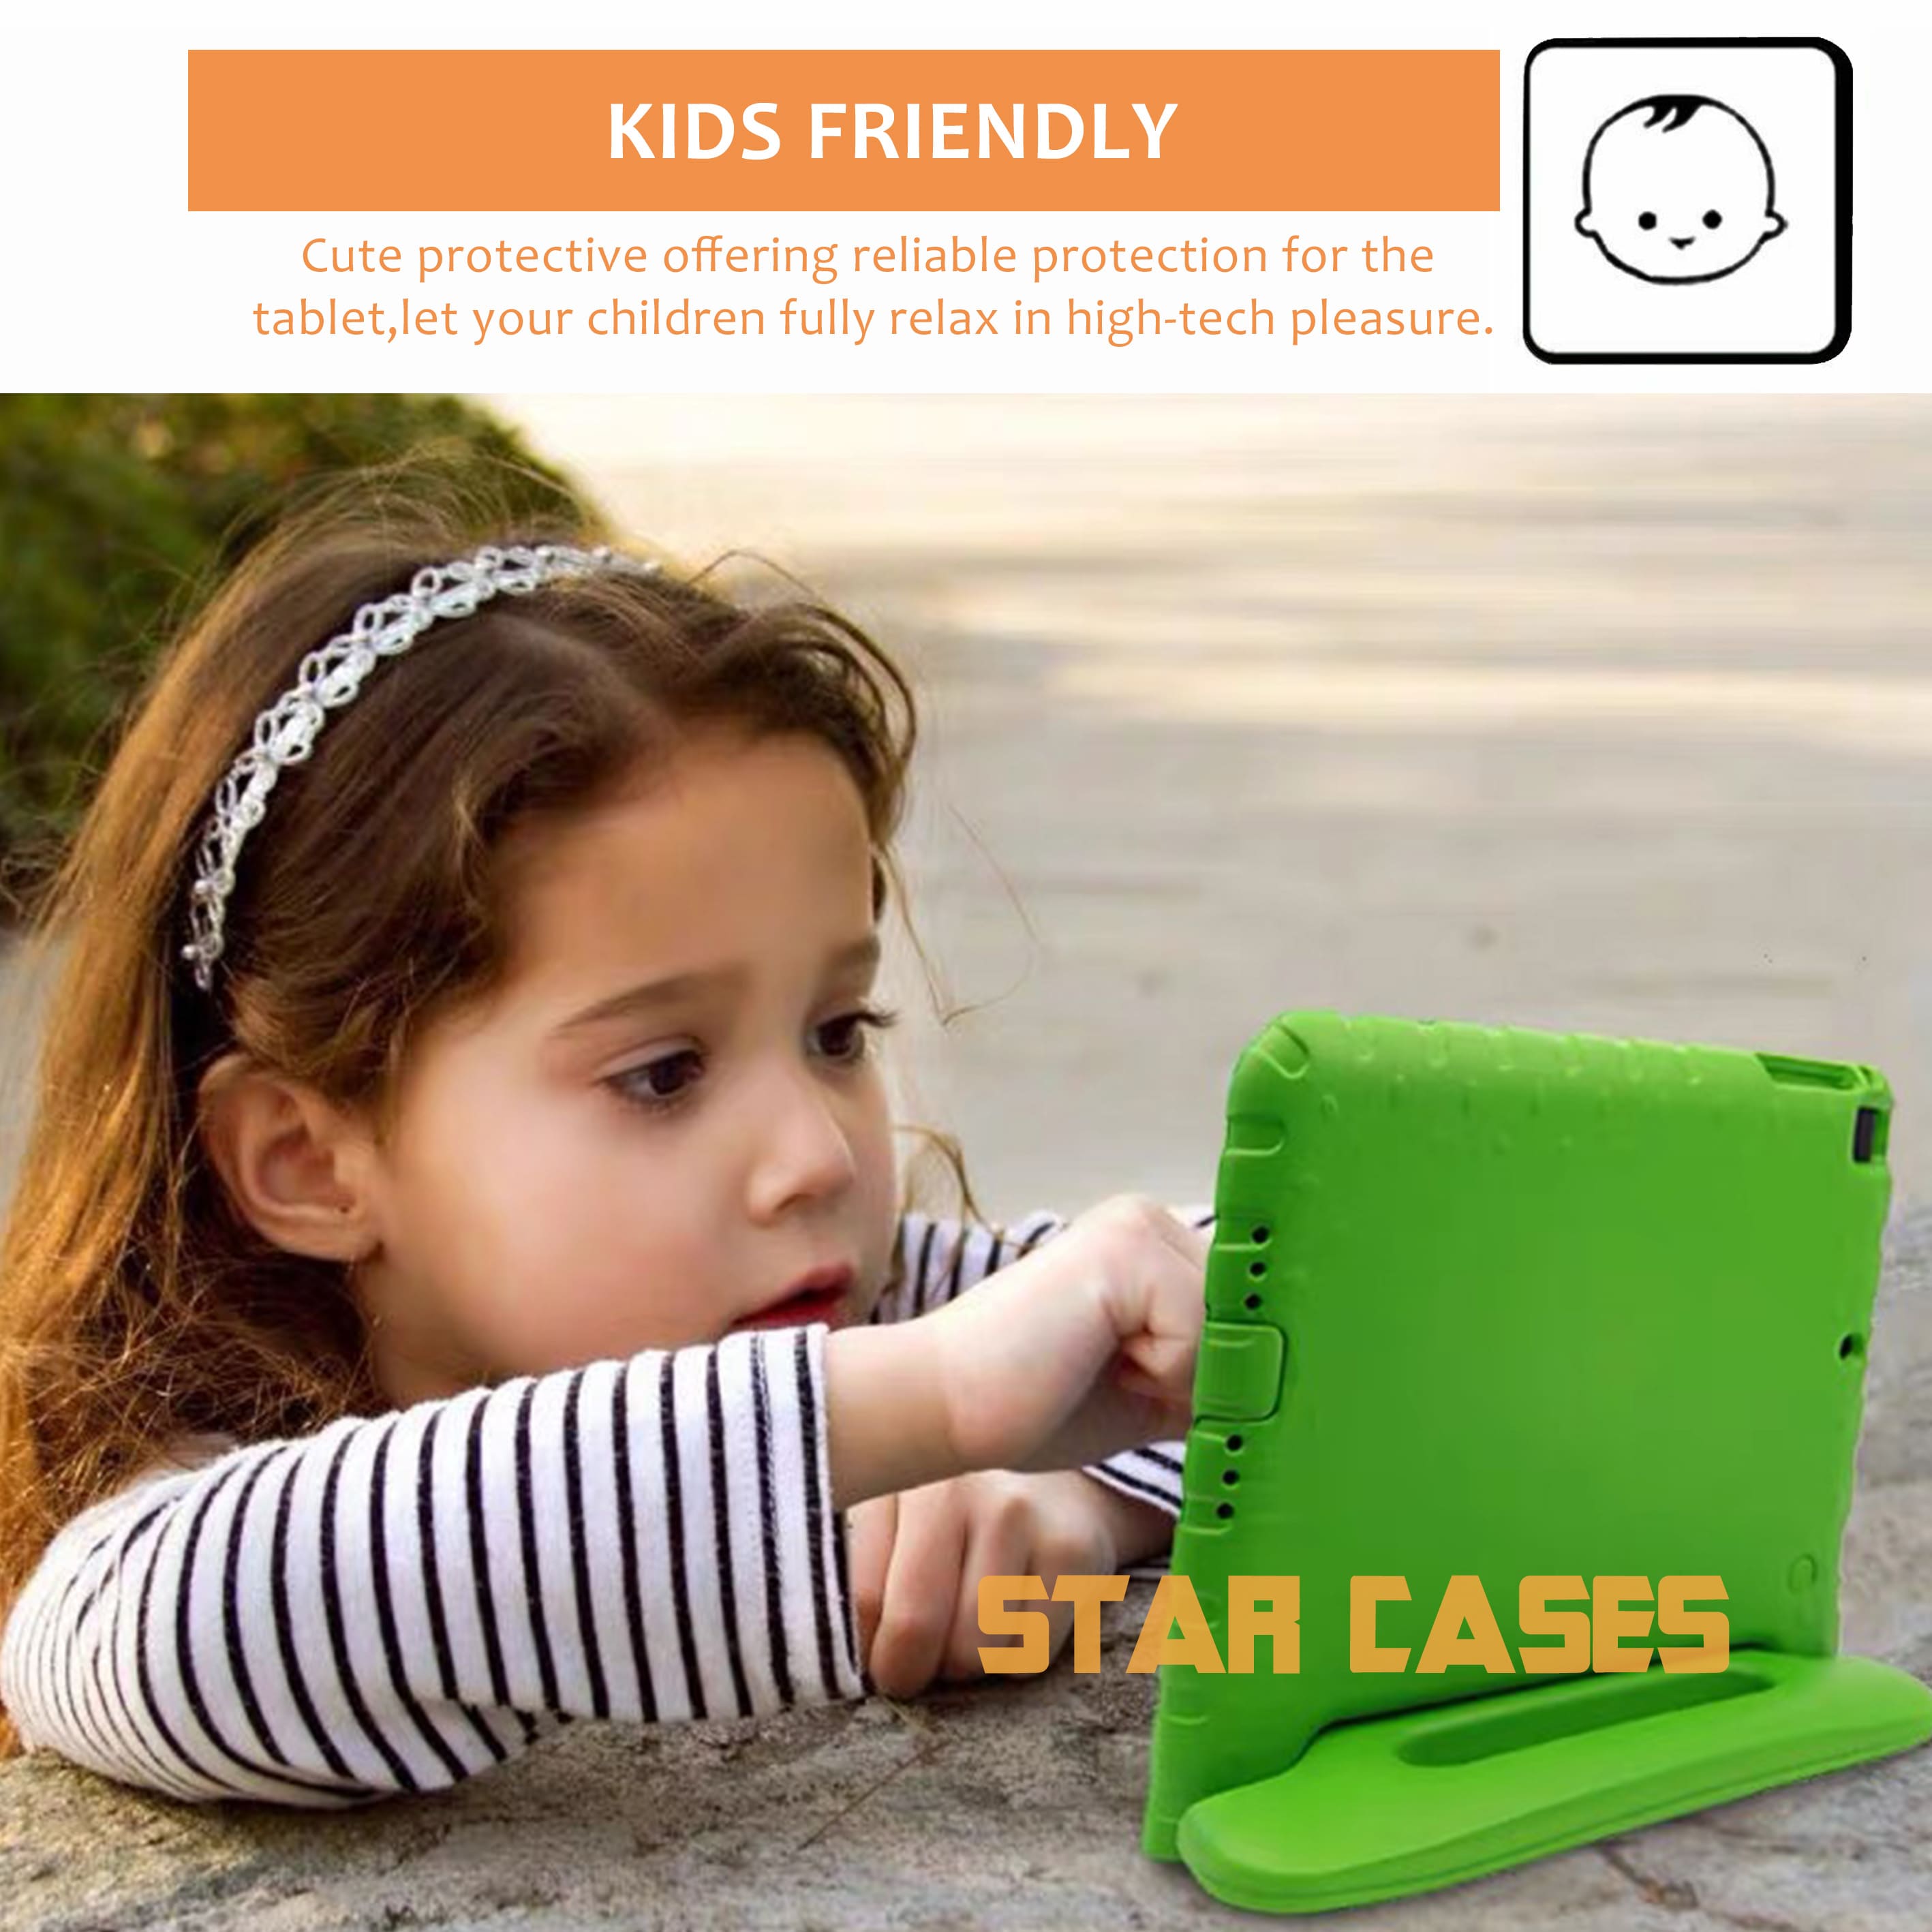 Samsung Tab A7 T500 Tablet Kids Flip Handle Stand Case